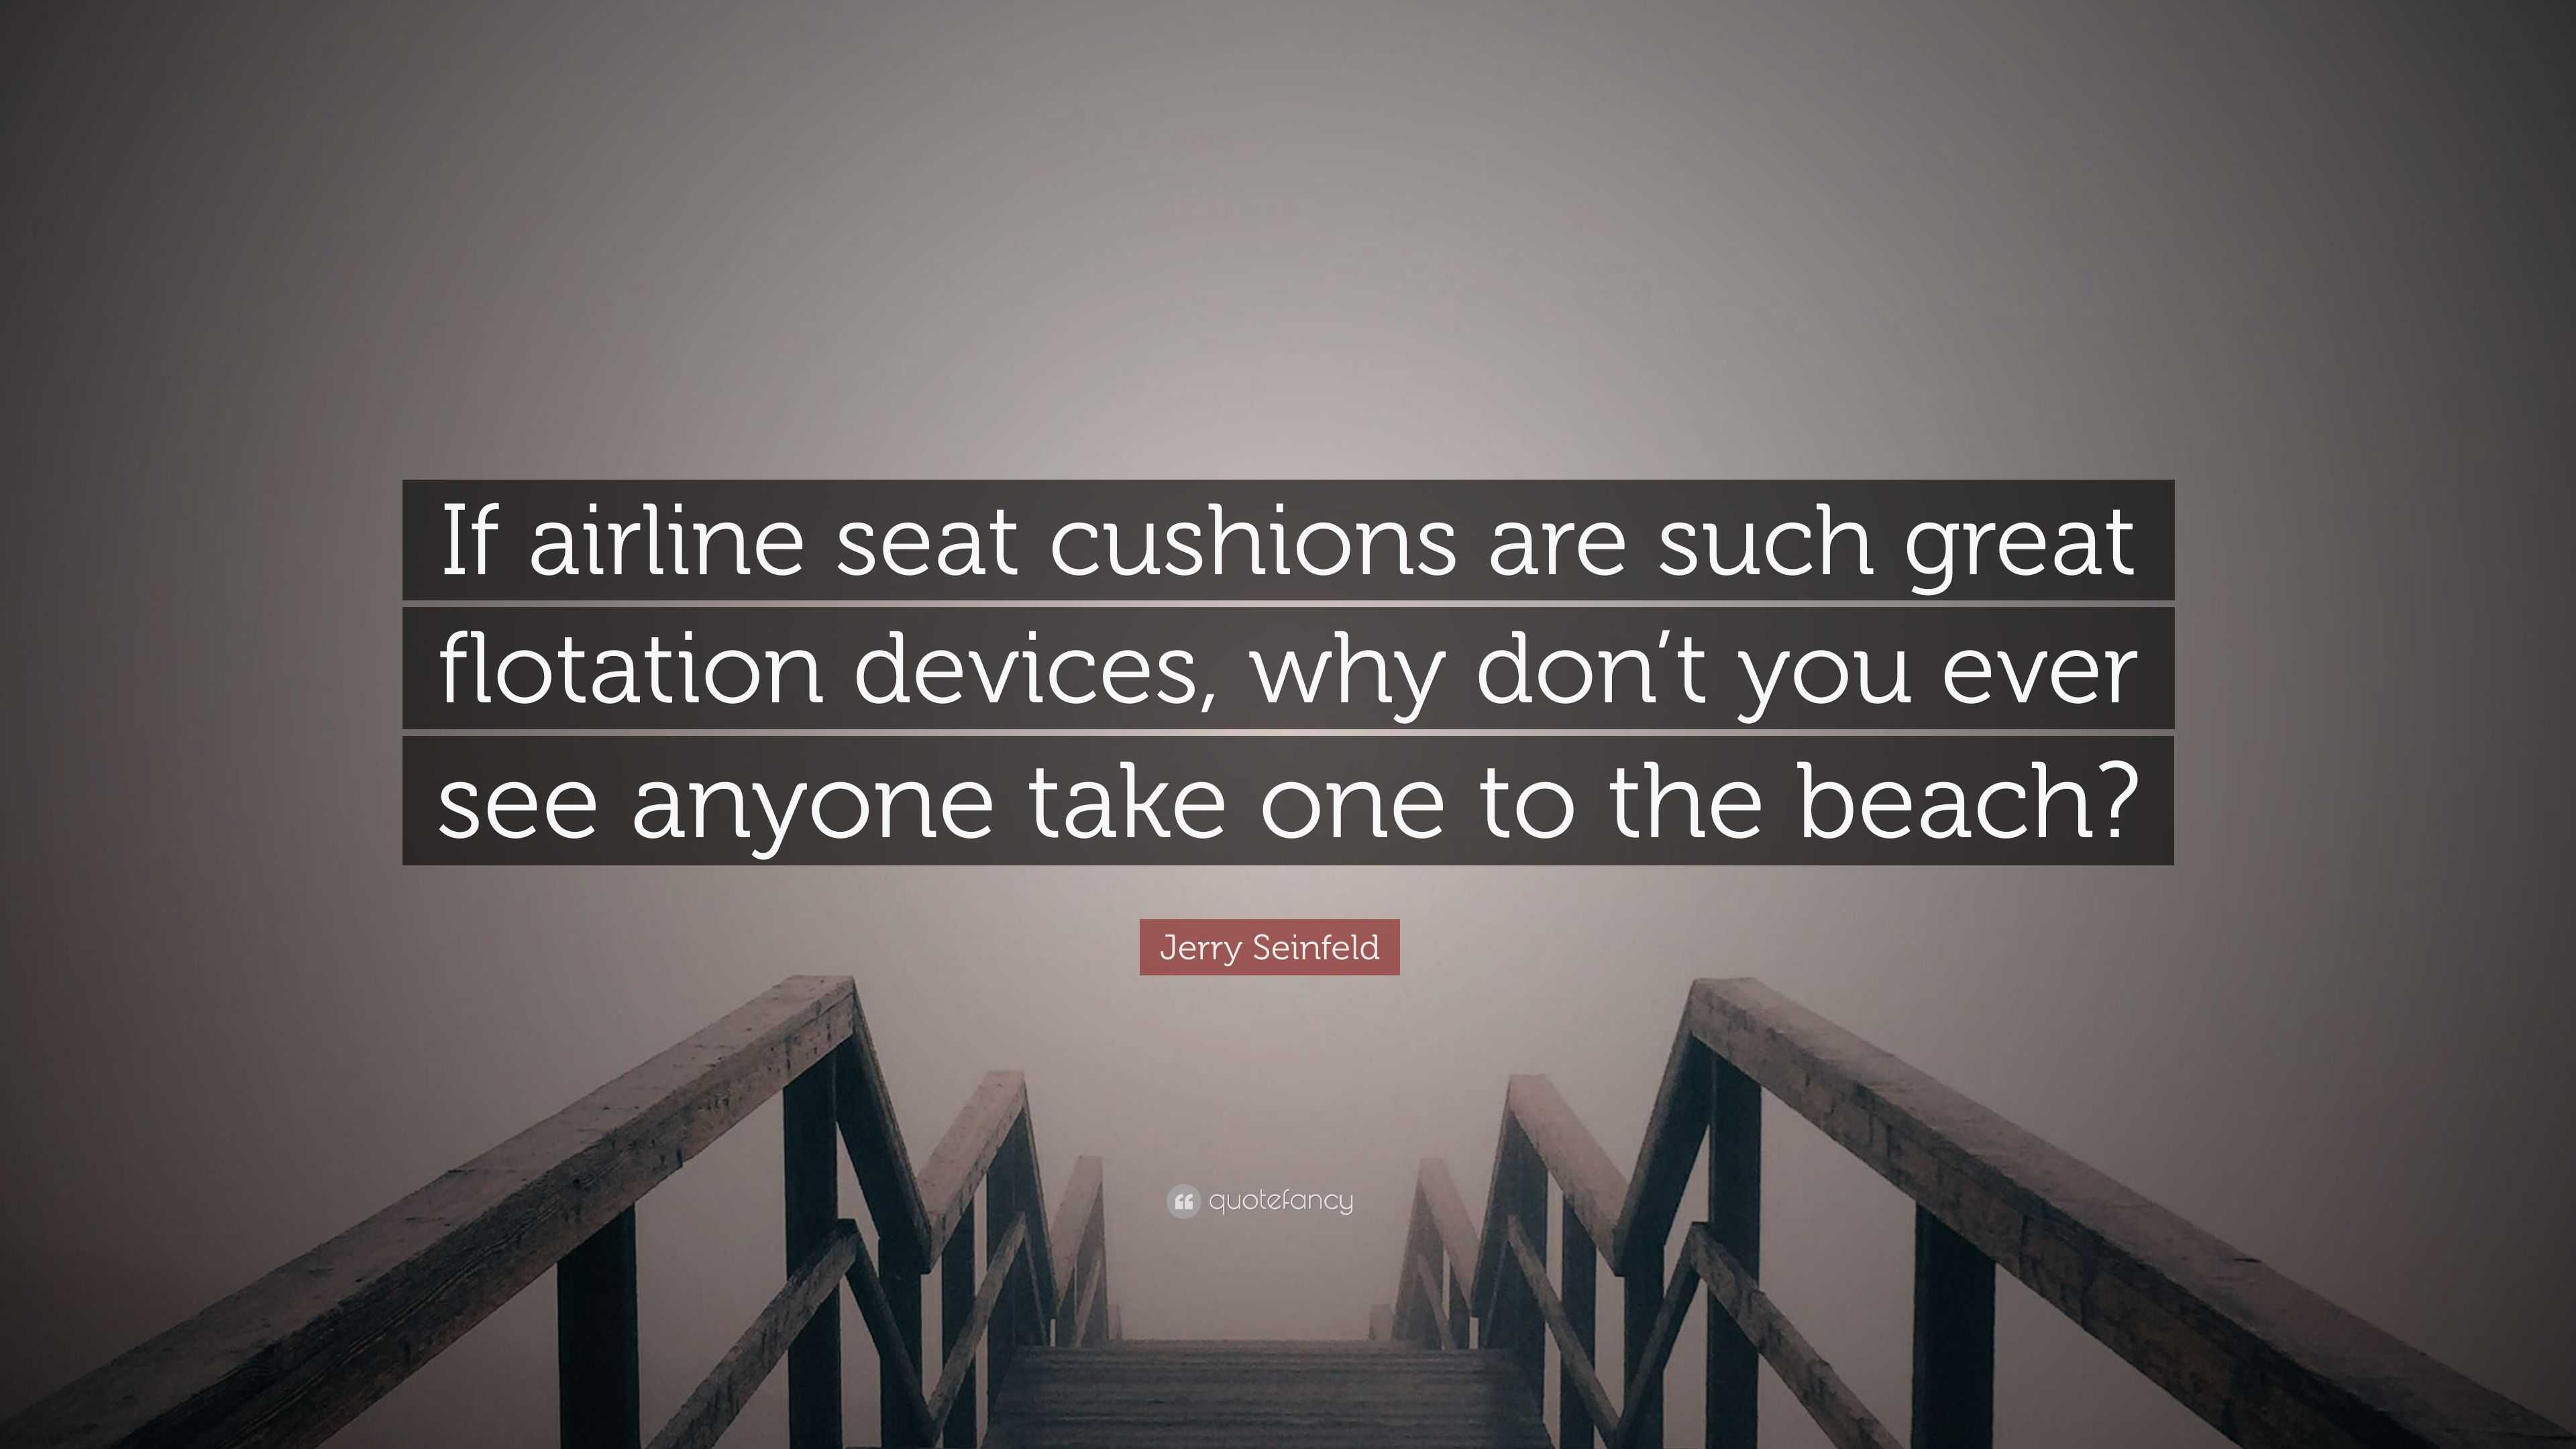 Jerry Seinfeld Quote: “If airline seat cushions are such great flotation  devices, why don't you